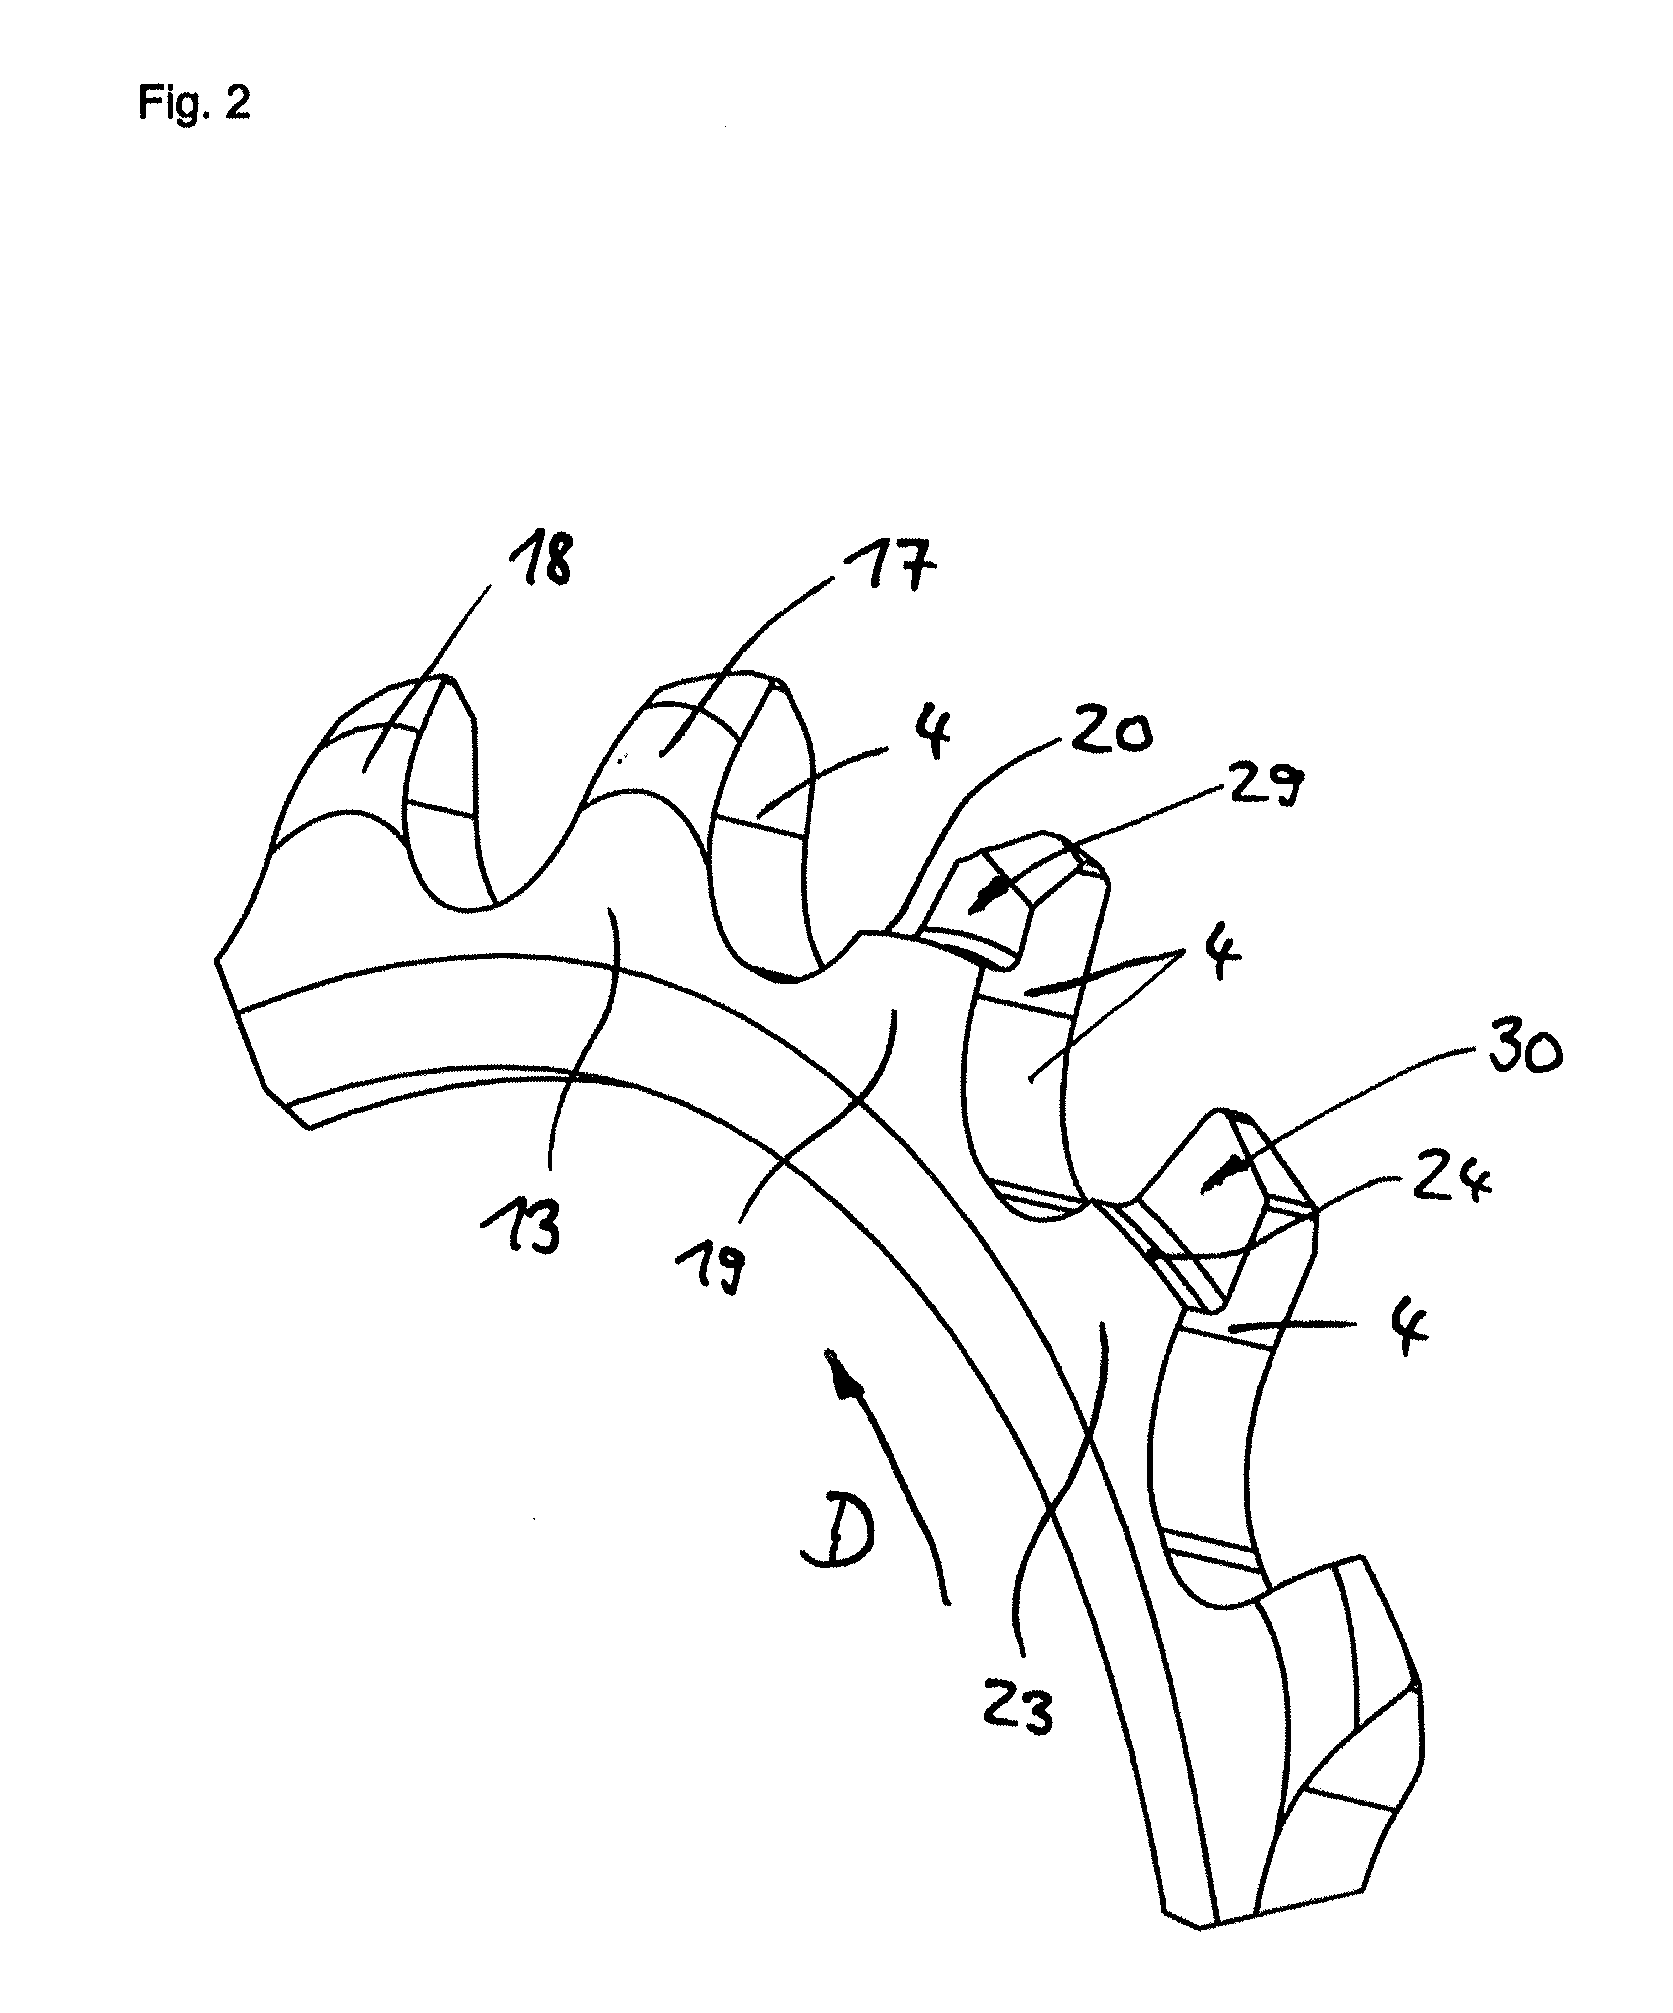 Sprocket for Rear Wheel of a Bicycle